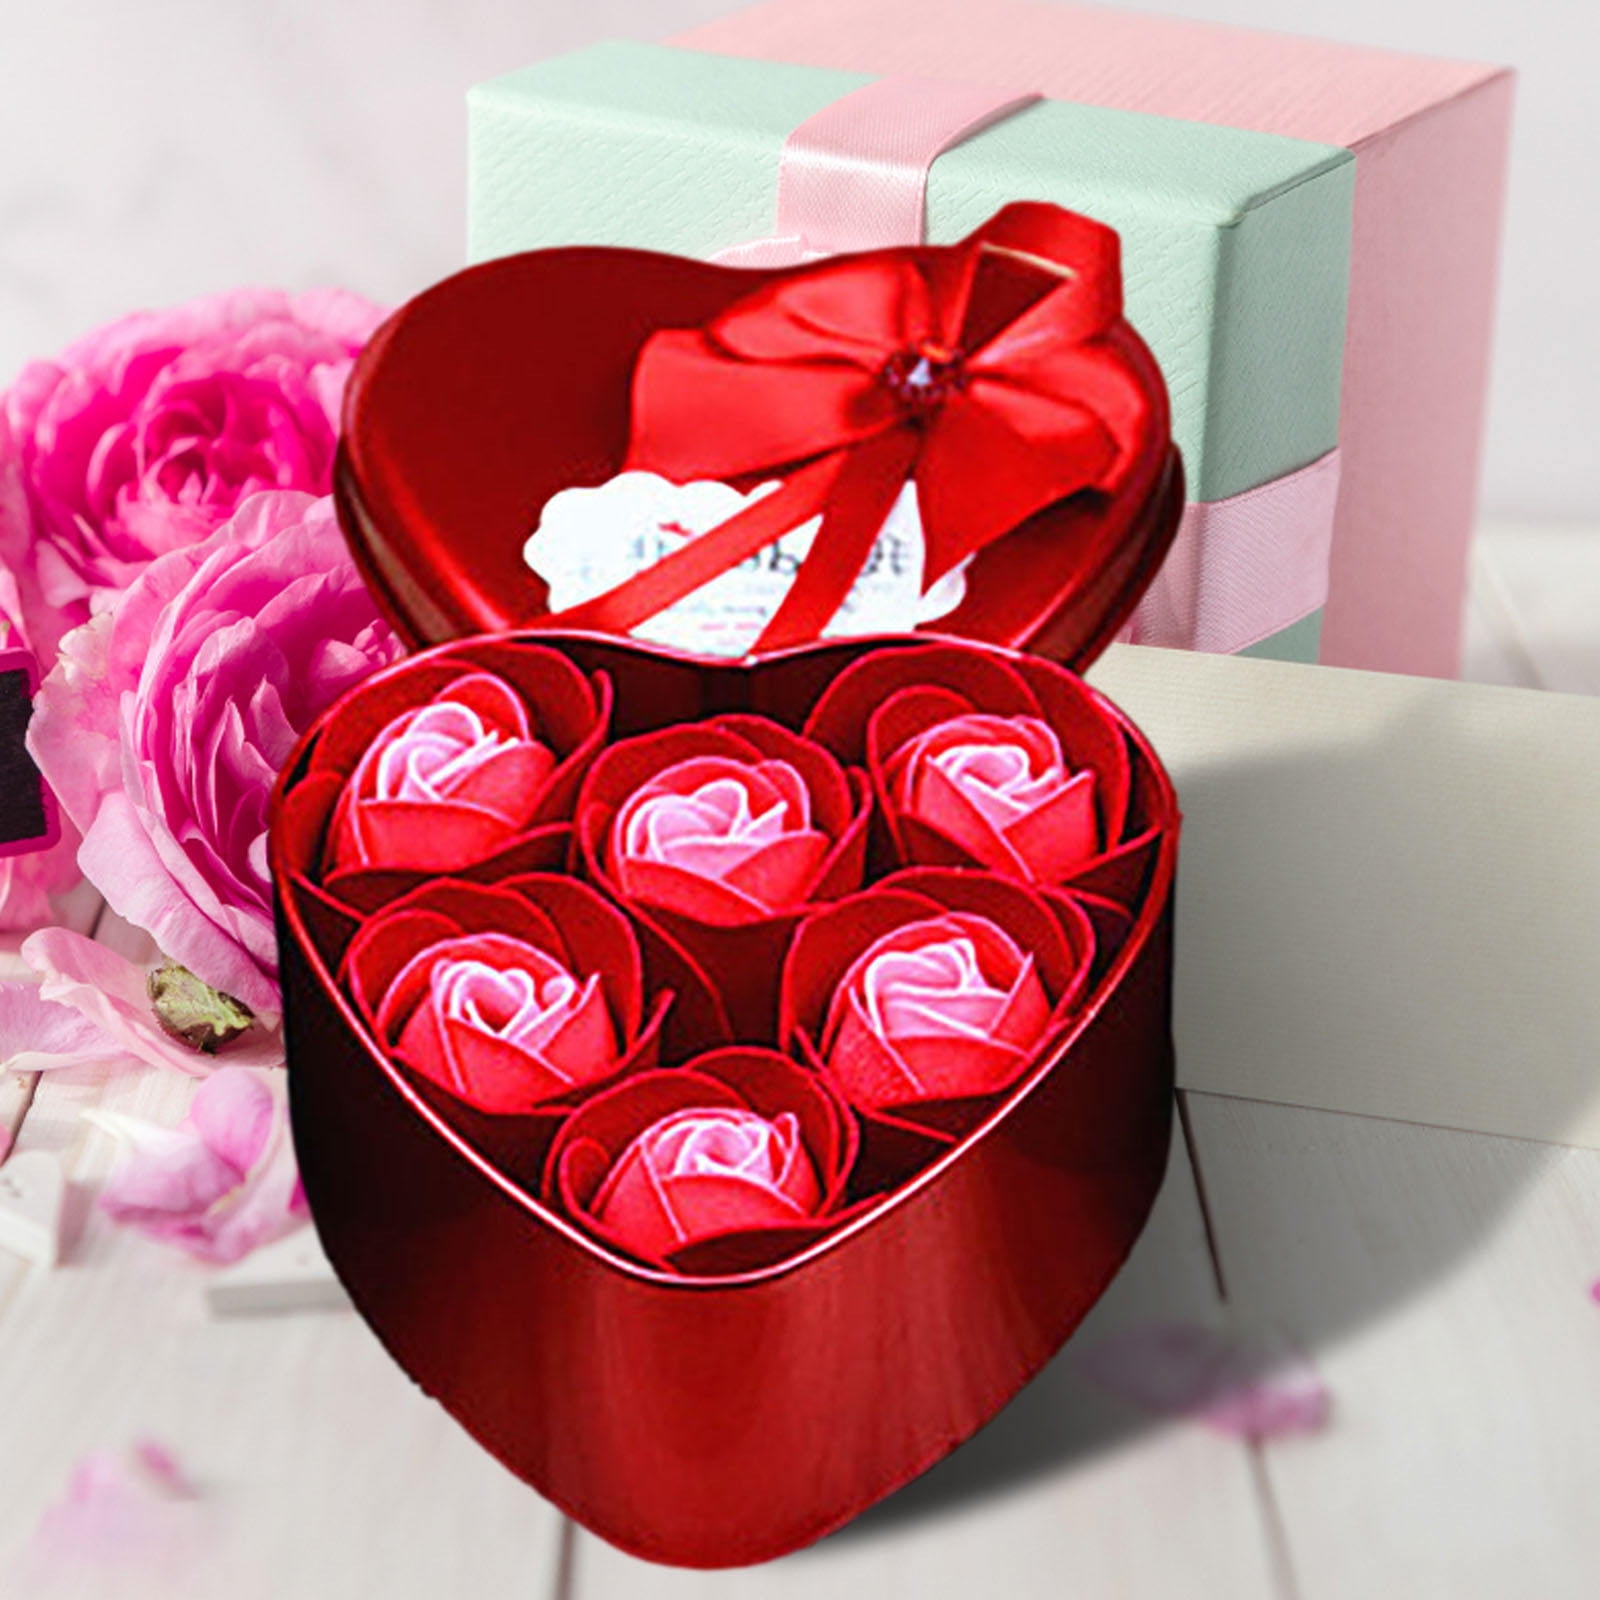 Mouliraty Valentines Day Decor Practical Small Gifts Heart-Shaped Soap Simulation Flower Gift Box Creative Valentine's Day Gift Promotion on Sale